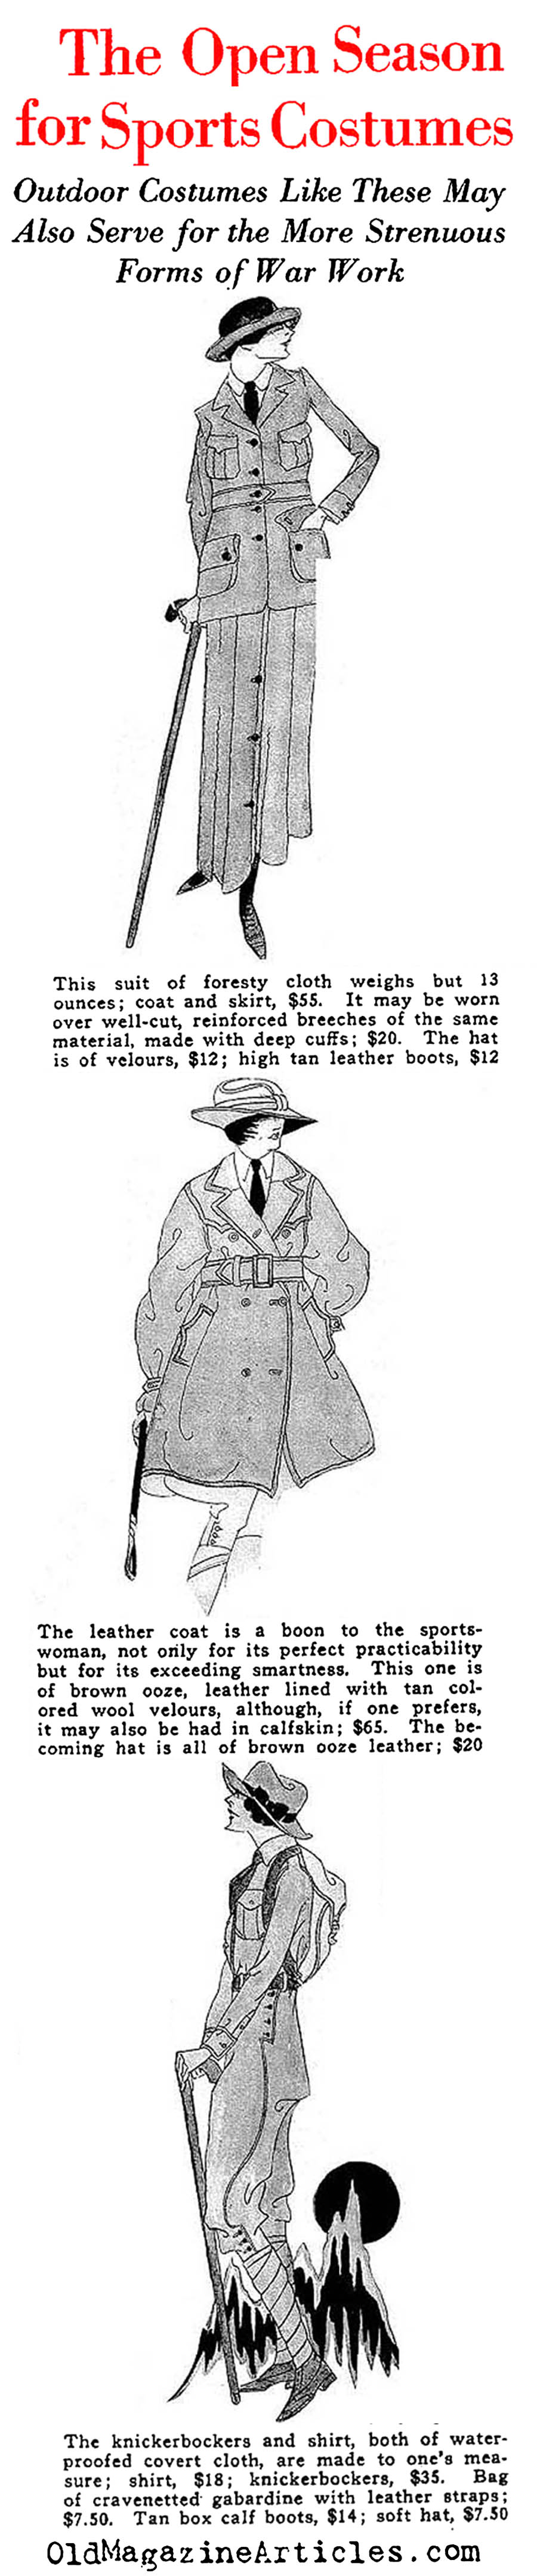 The Great War and It's Influence on Feminine Fashion   (Vanity Fair, 1918)